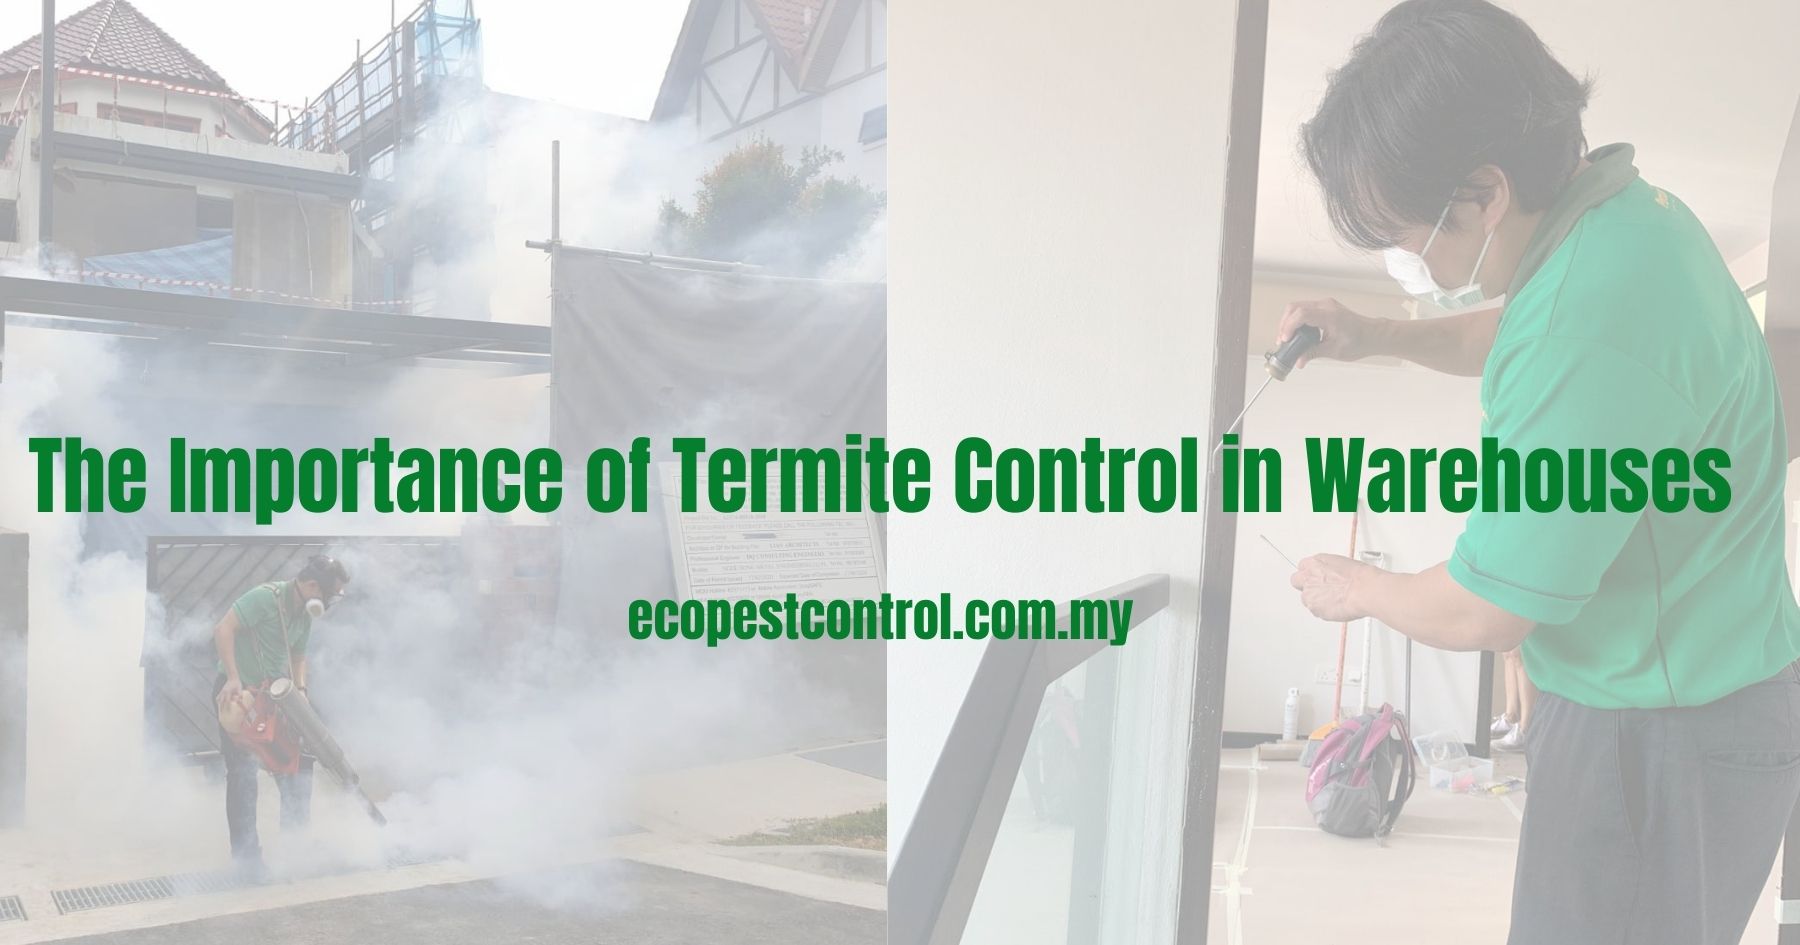 The Importance of Termite Control in Warehouses